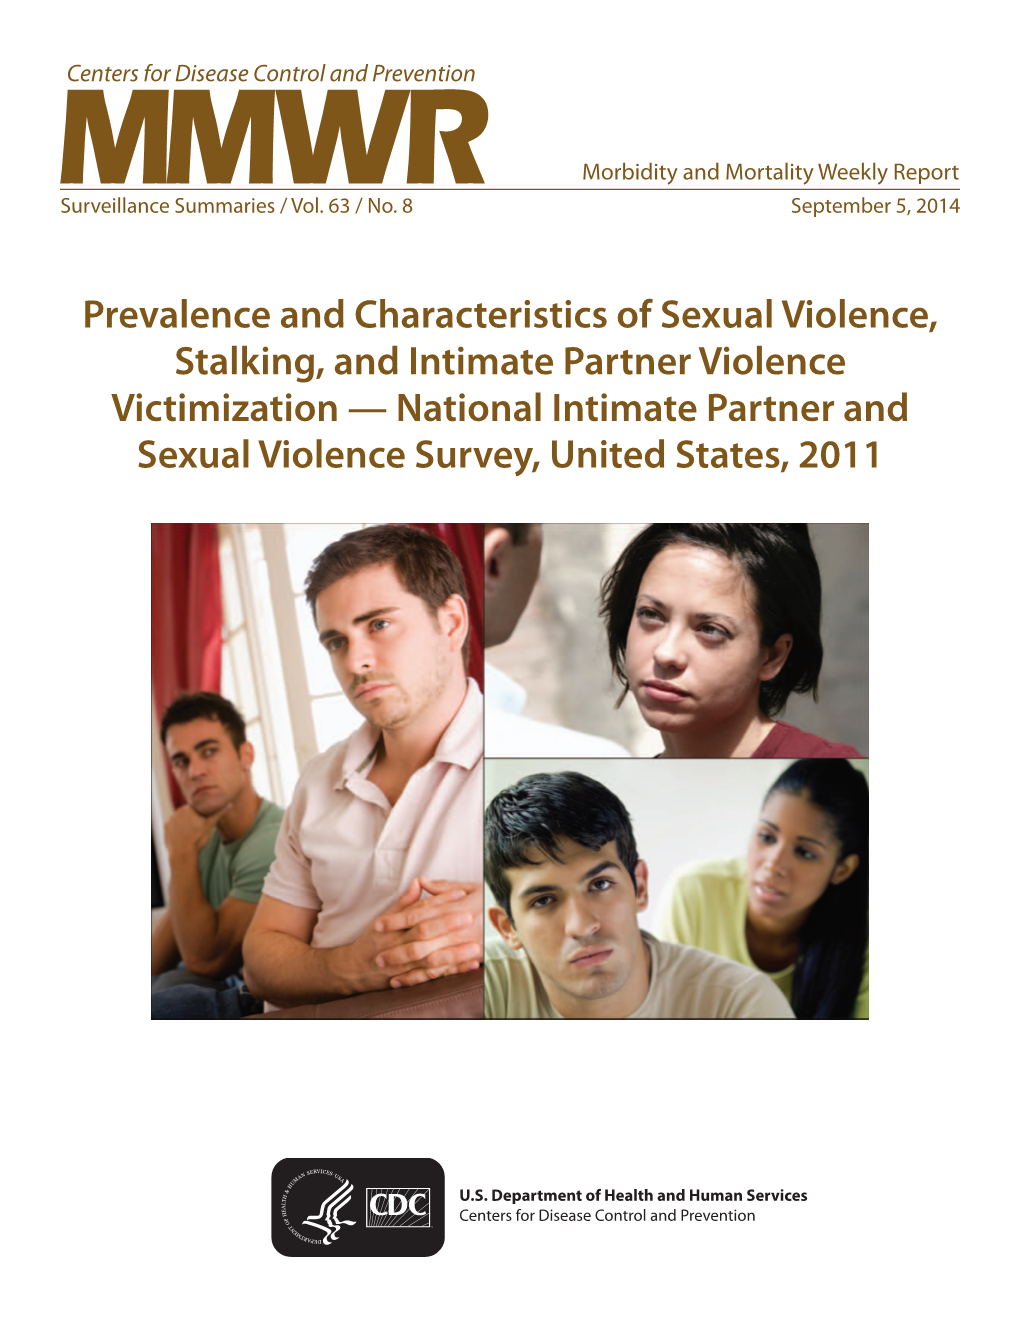 National Intimate Partner and Sexual Violence Survey, United States, 2011